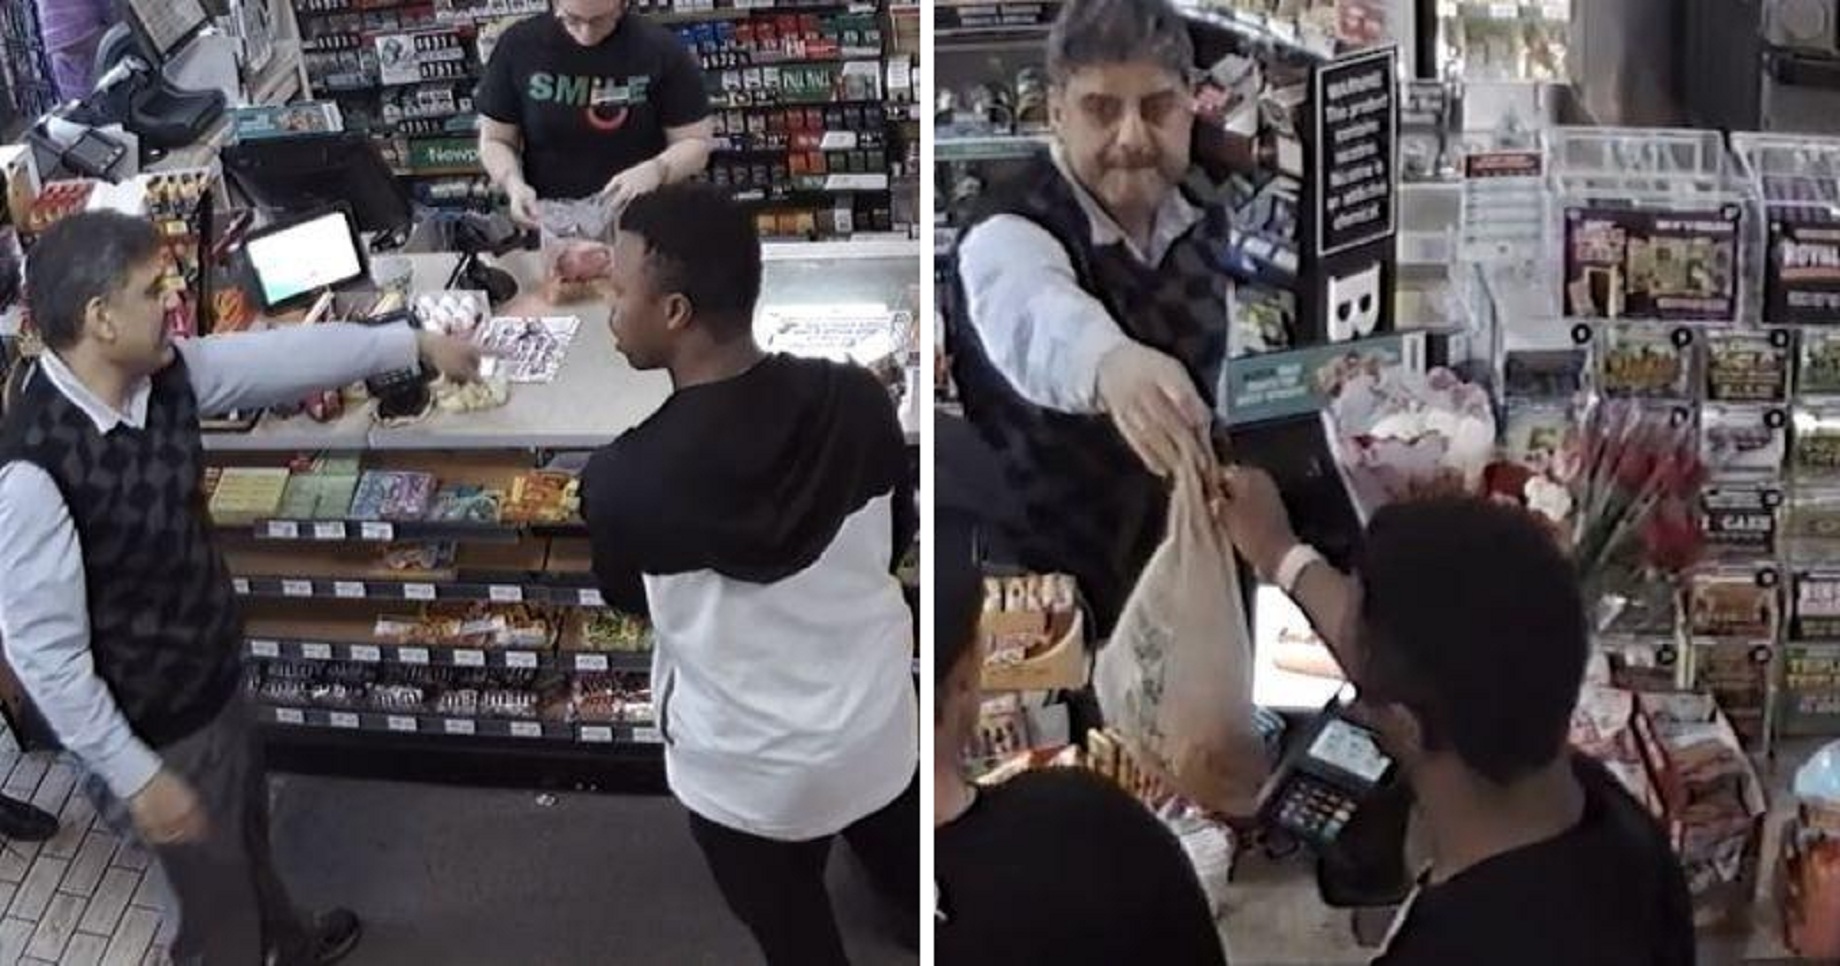 Shopkeeper Catches Hungry Teen Stealing, Offers Him Food Instead Of Calling Cops